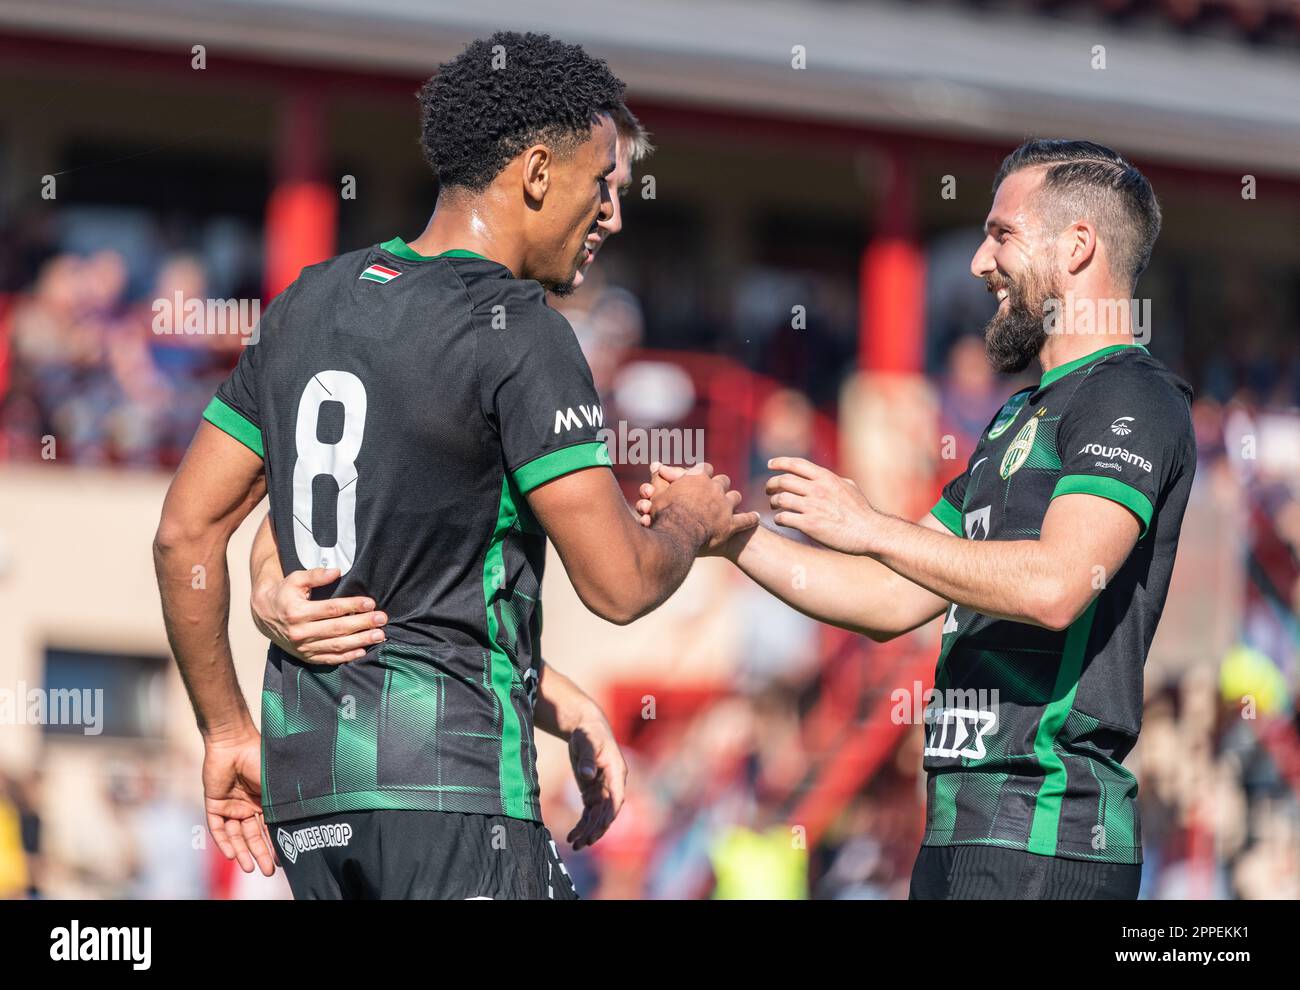 Ivancsa, Hungary – October 19, 2022. Ferencvaros players Ryan Mmaee and Xavier Mercier celebrating Mmaee’s goal in Hungarian Cup Round of 32 match Iva Stock Photo